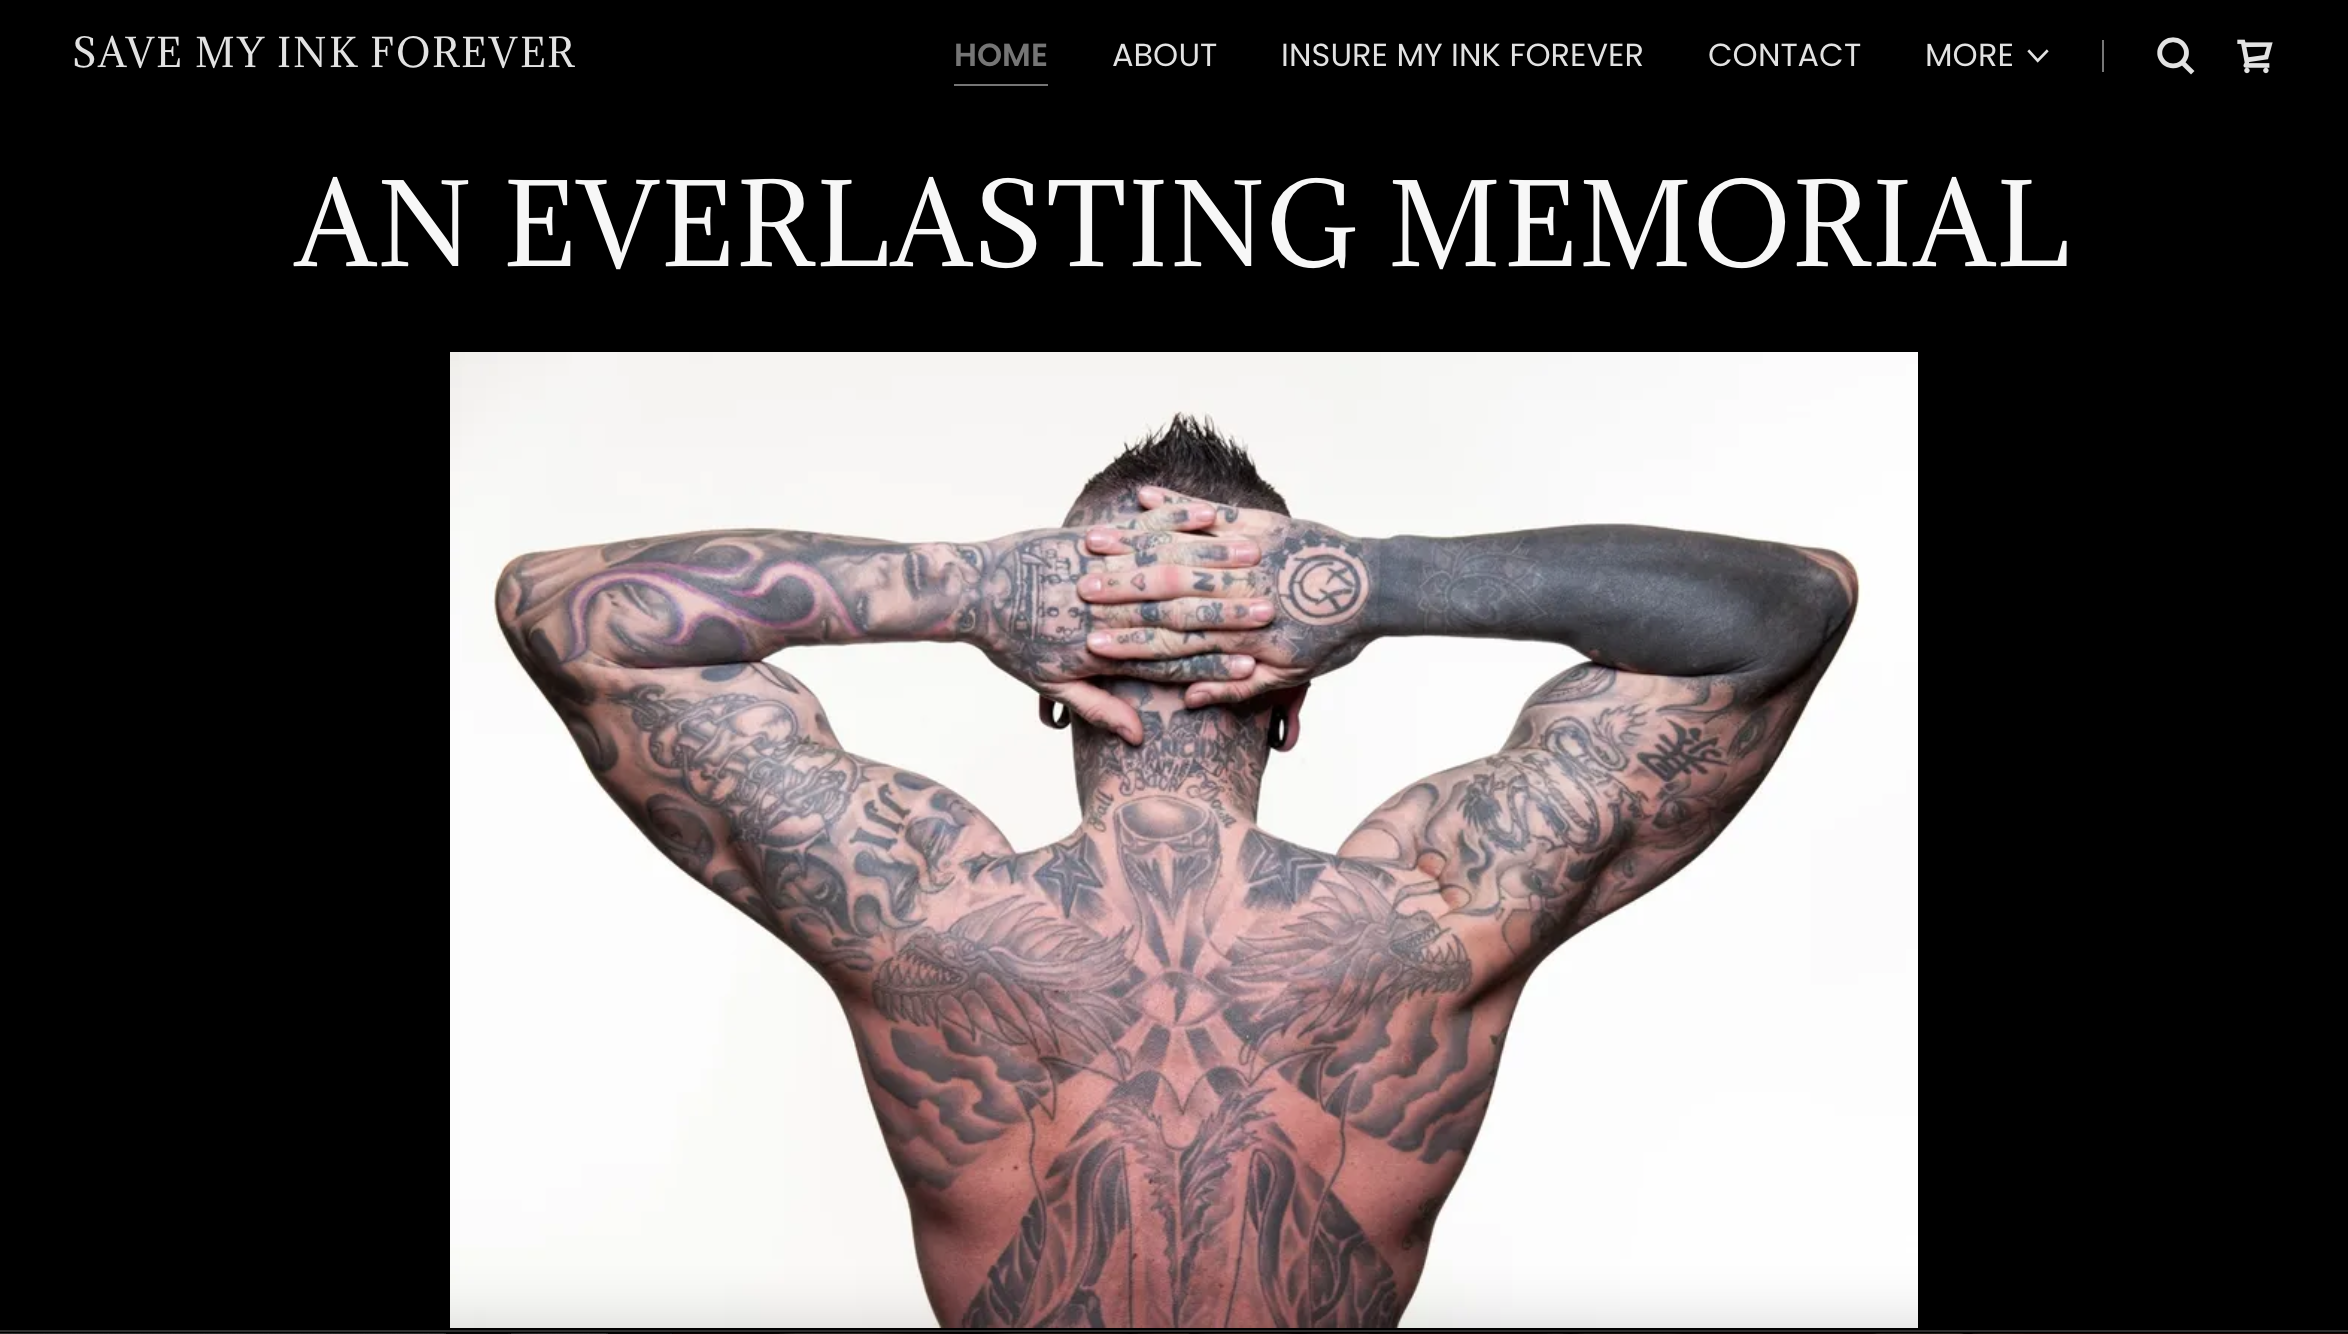 Screen shot of save My Ink Forever website featuring a photograph of a light skinned man's back and arms folded behind head, covered with tattoos.